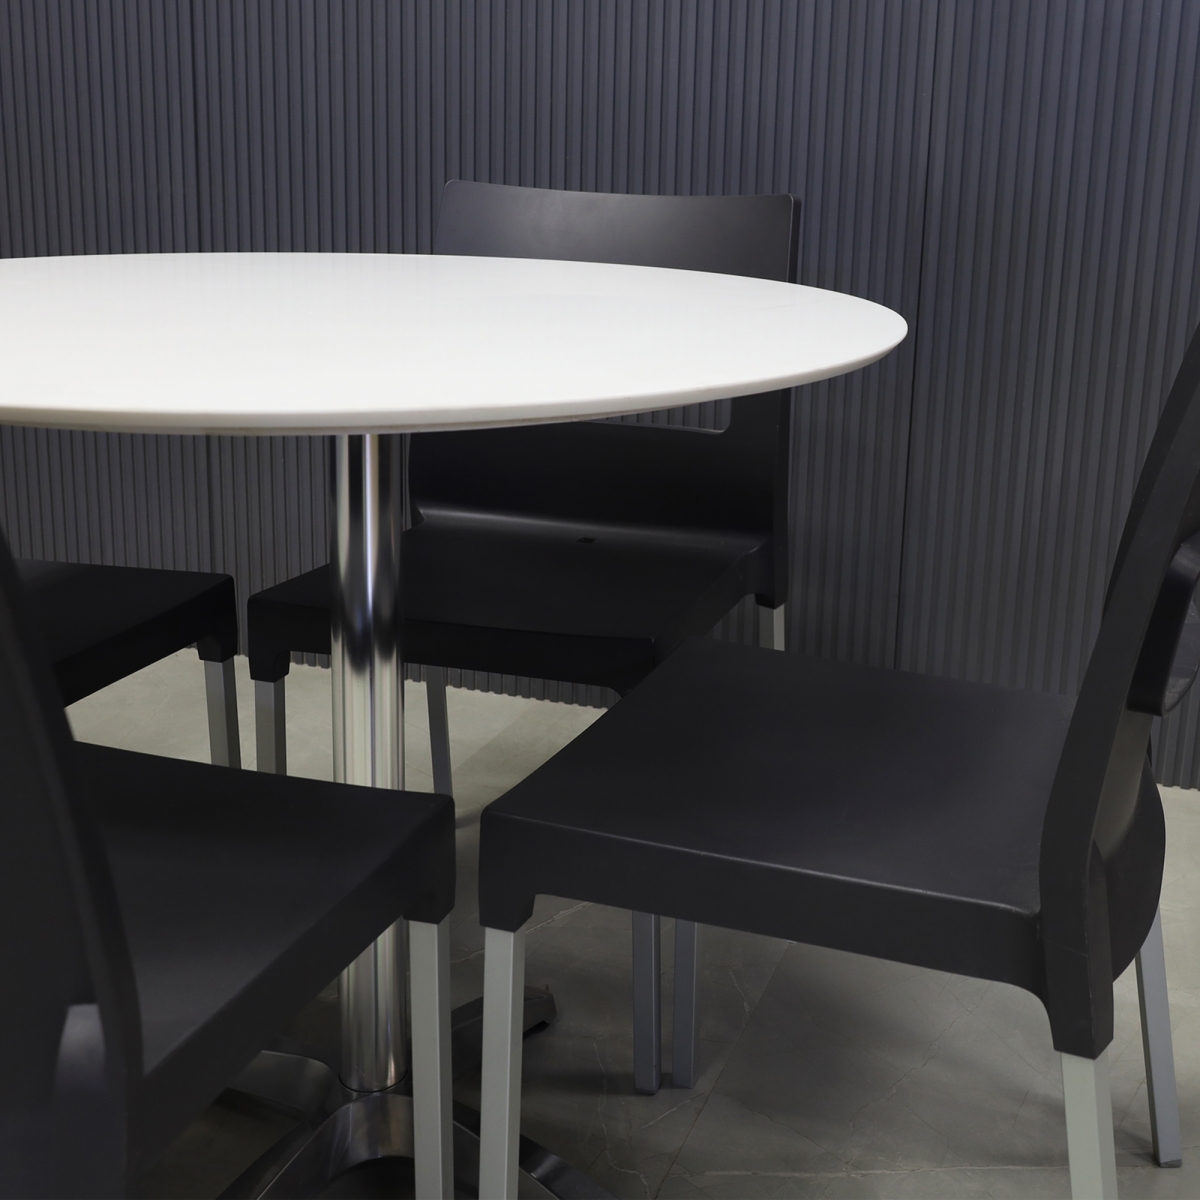 California Round Conference/Cafeteria Table with White Solid Engineered Stone Top - 29 In. - Stock #69